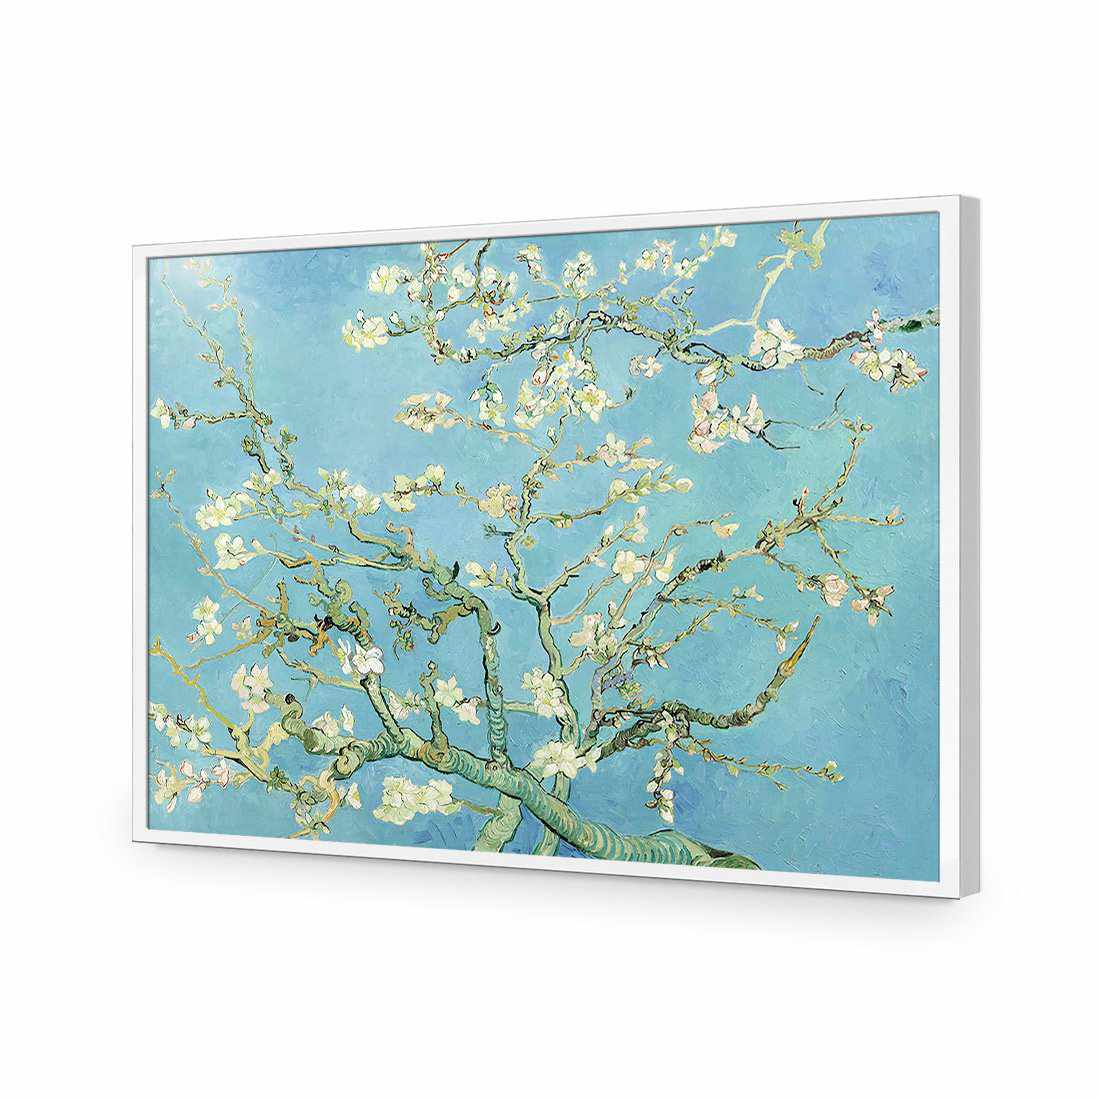 Blossoming Almond Tree - Van Gogh-Acrylic-Wall Art Design-Without Border-Acrylic - White Frame-45x30cm-Wall Art Designs